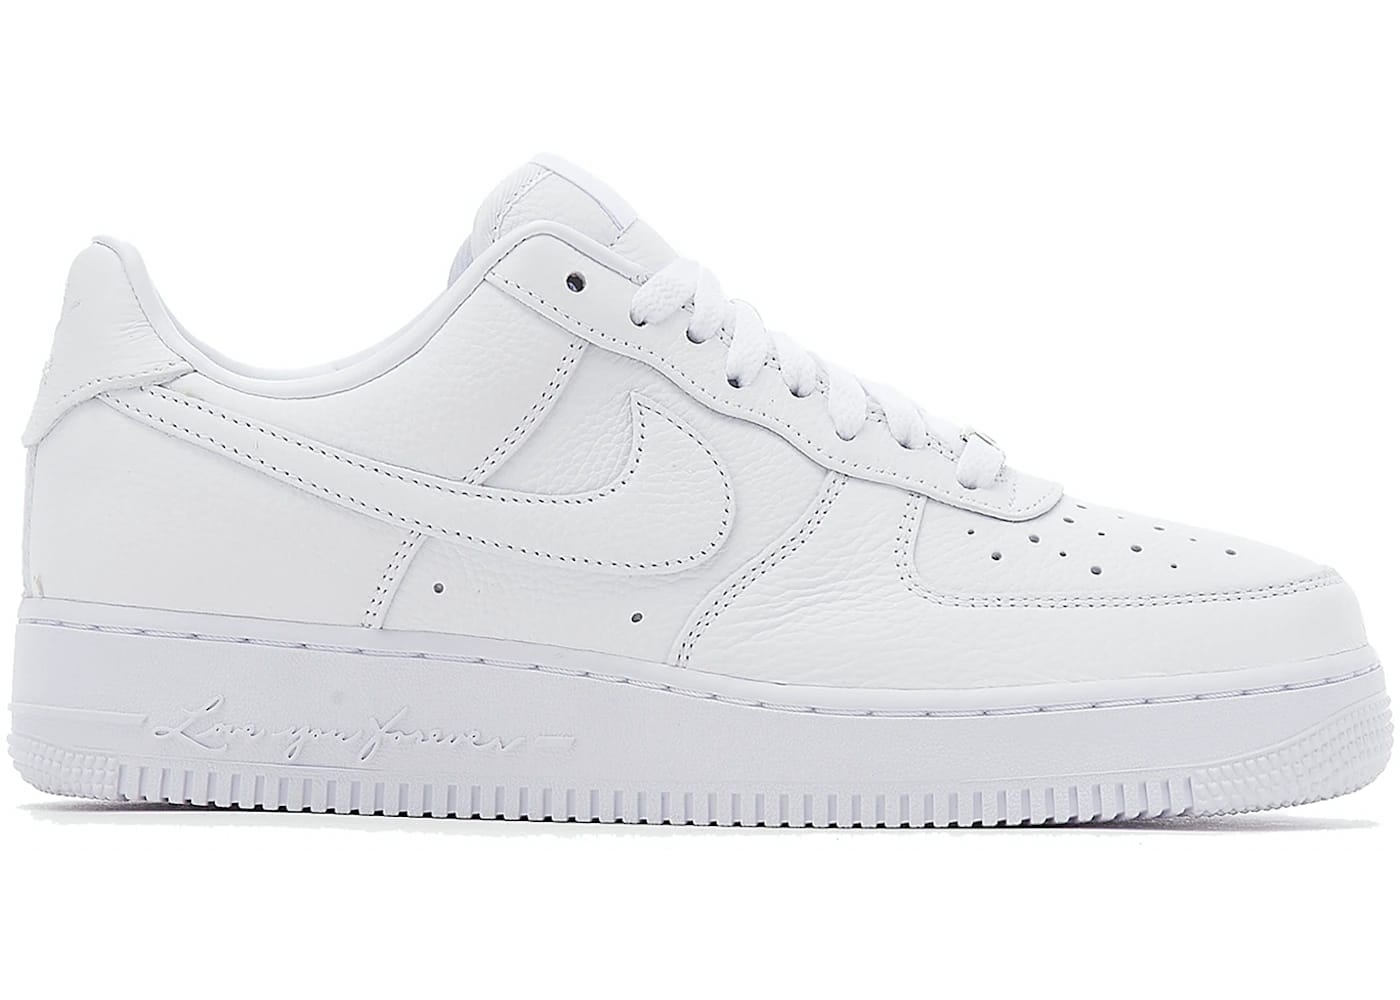 Nike Air Force 1 Low Drake NOCTA Certified Lover Boy (Love You Forever Edition)